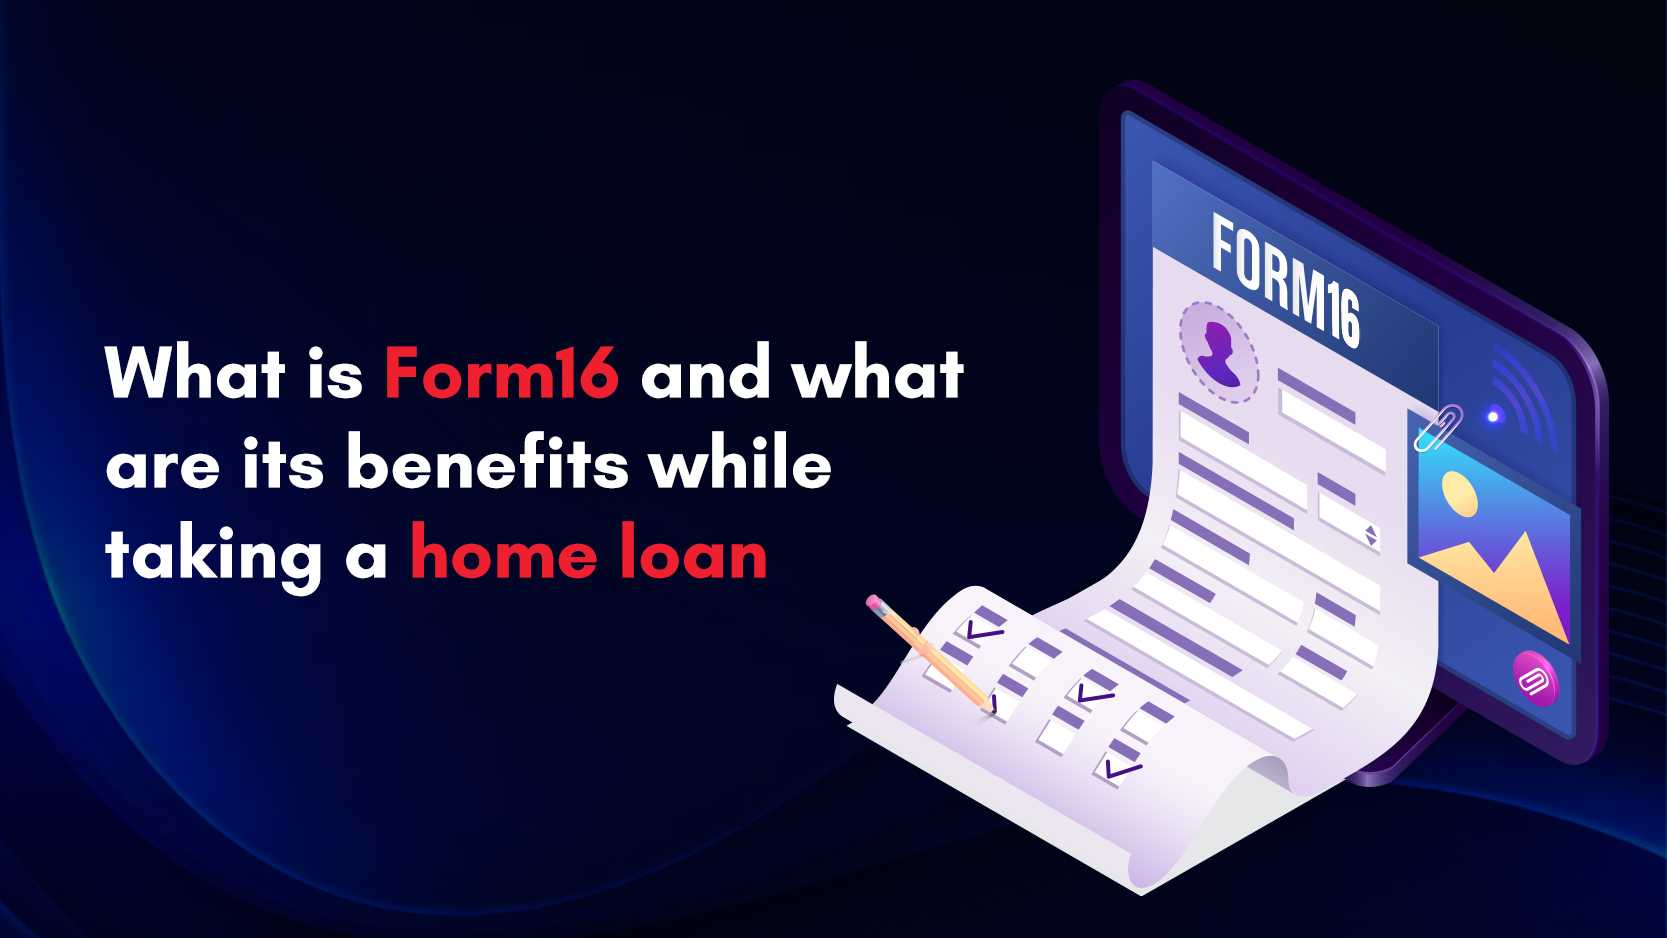 What is Form 16 and What are its Benefits while taking a Home Loan?